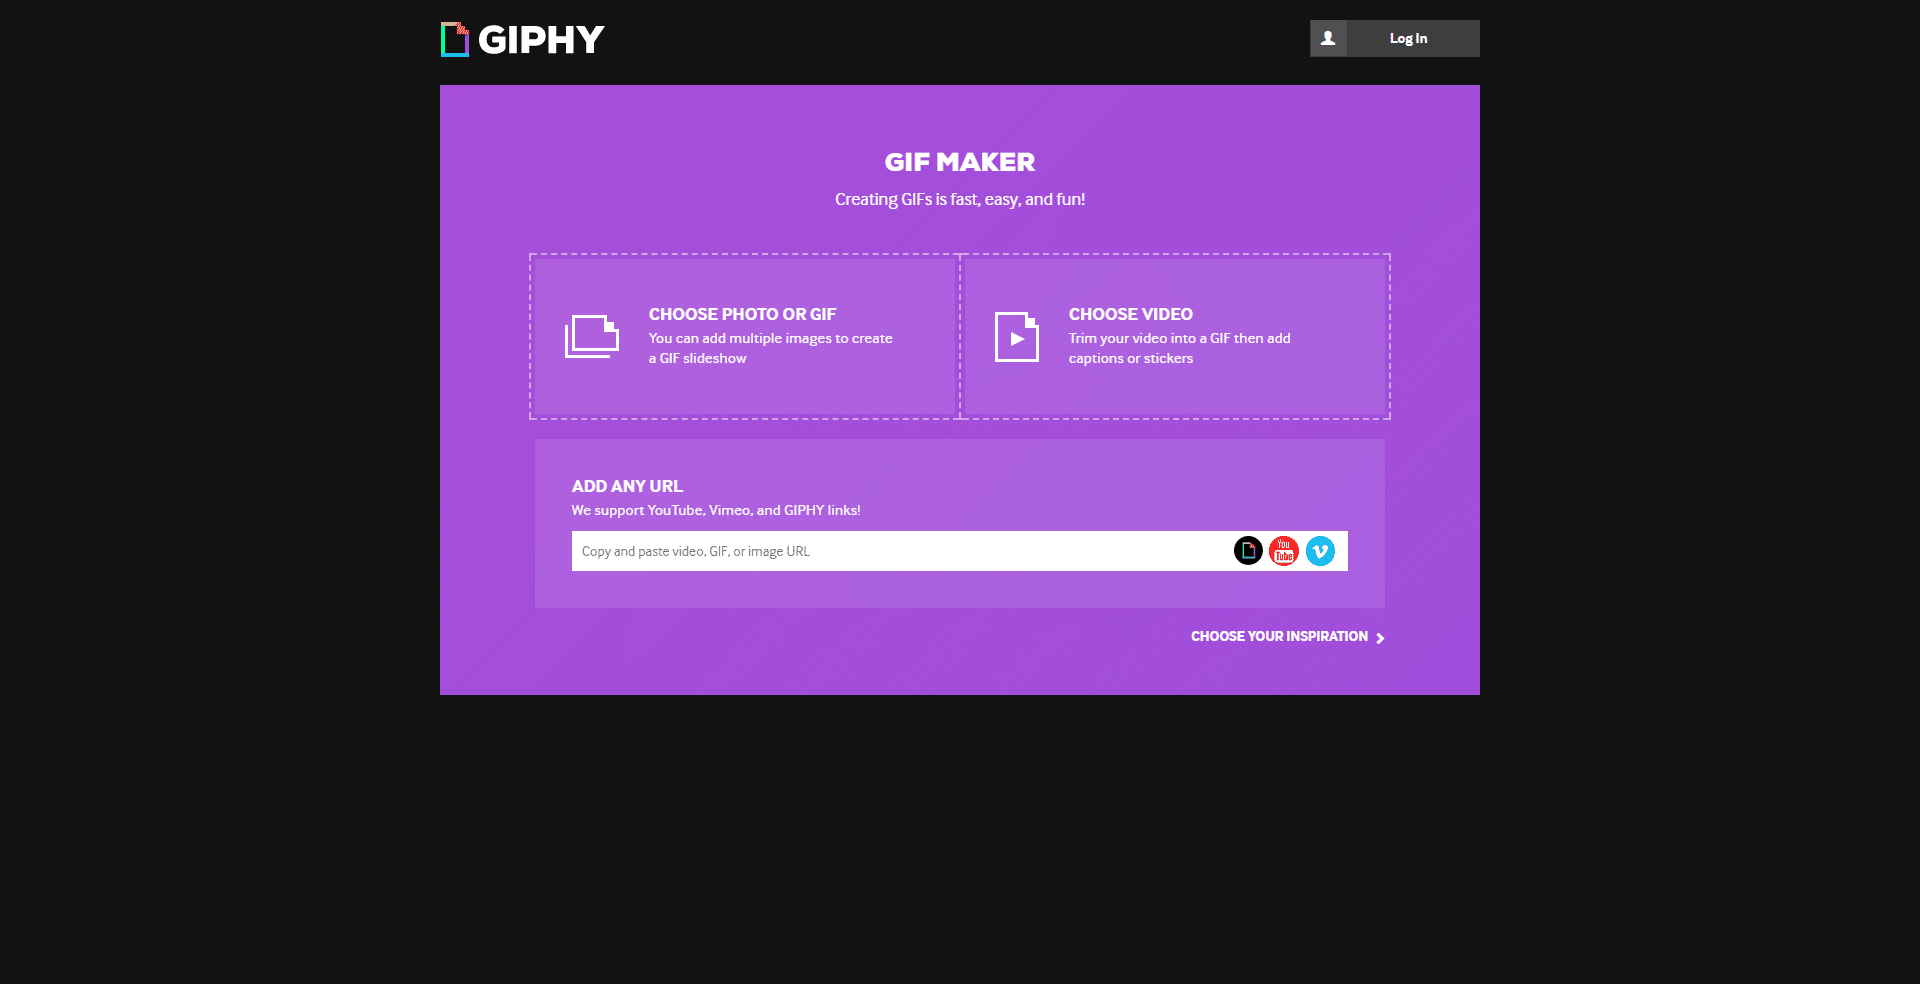 Free Tools for Making Easy GIFs